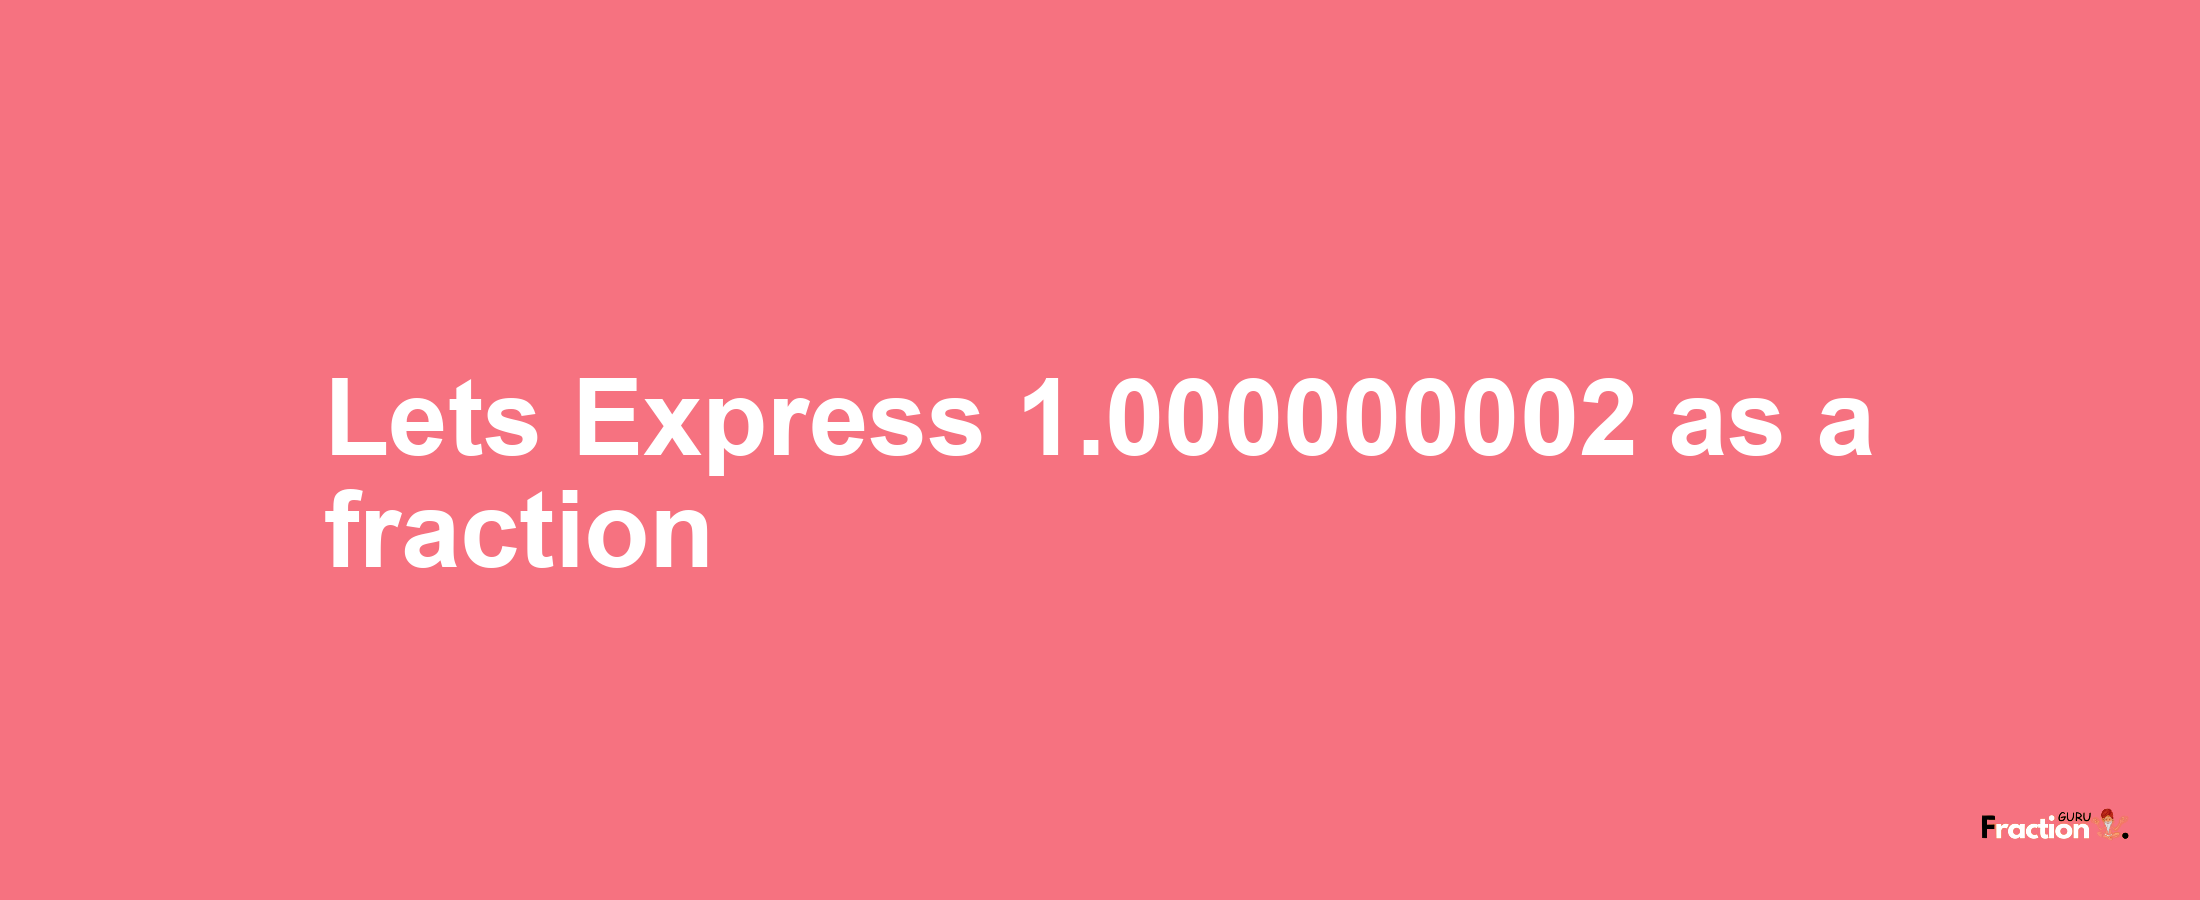 Lets Express 1.000000002 as afraction